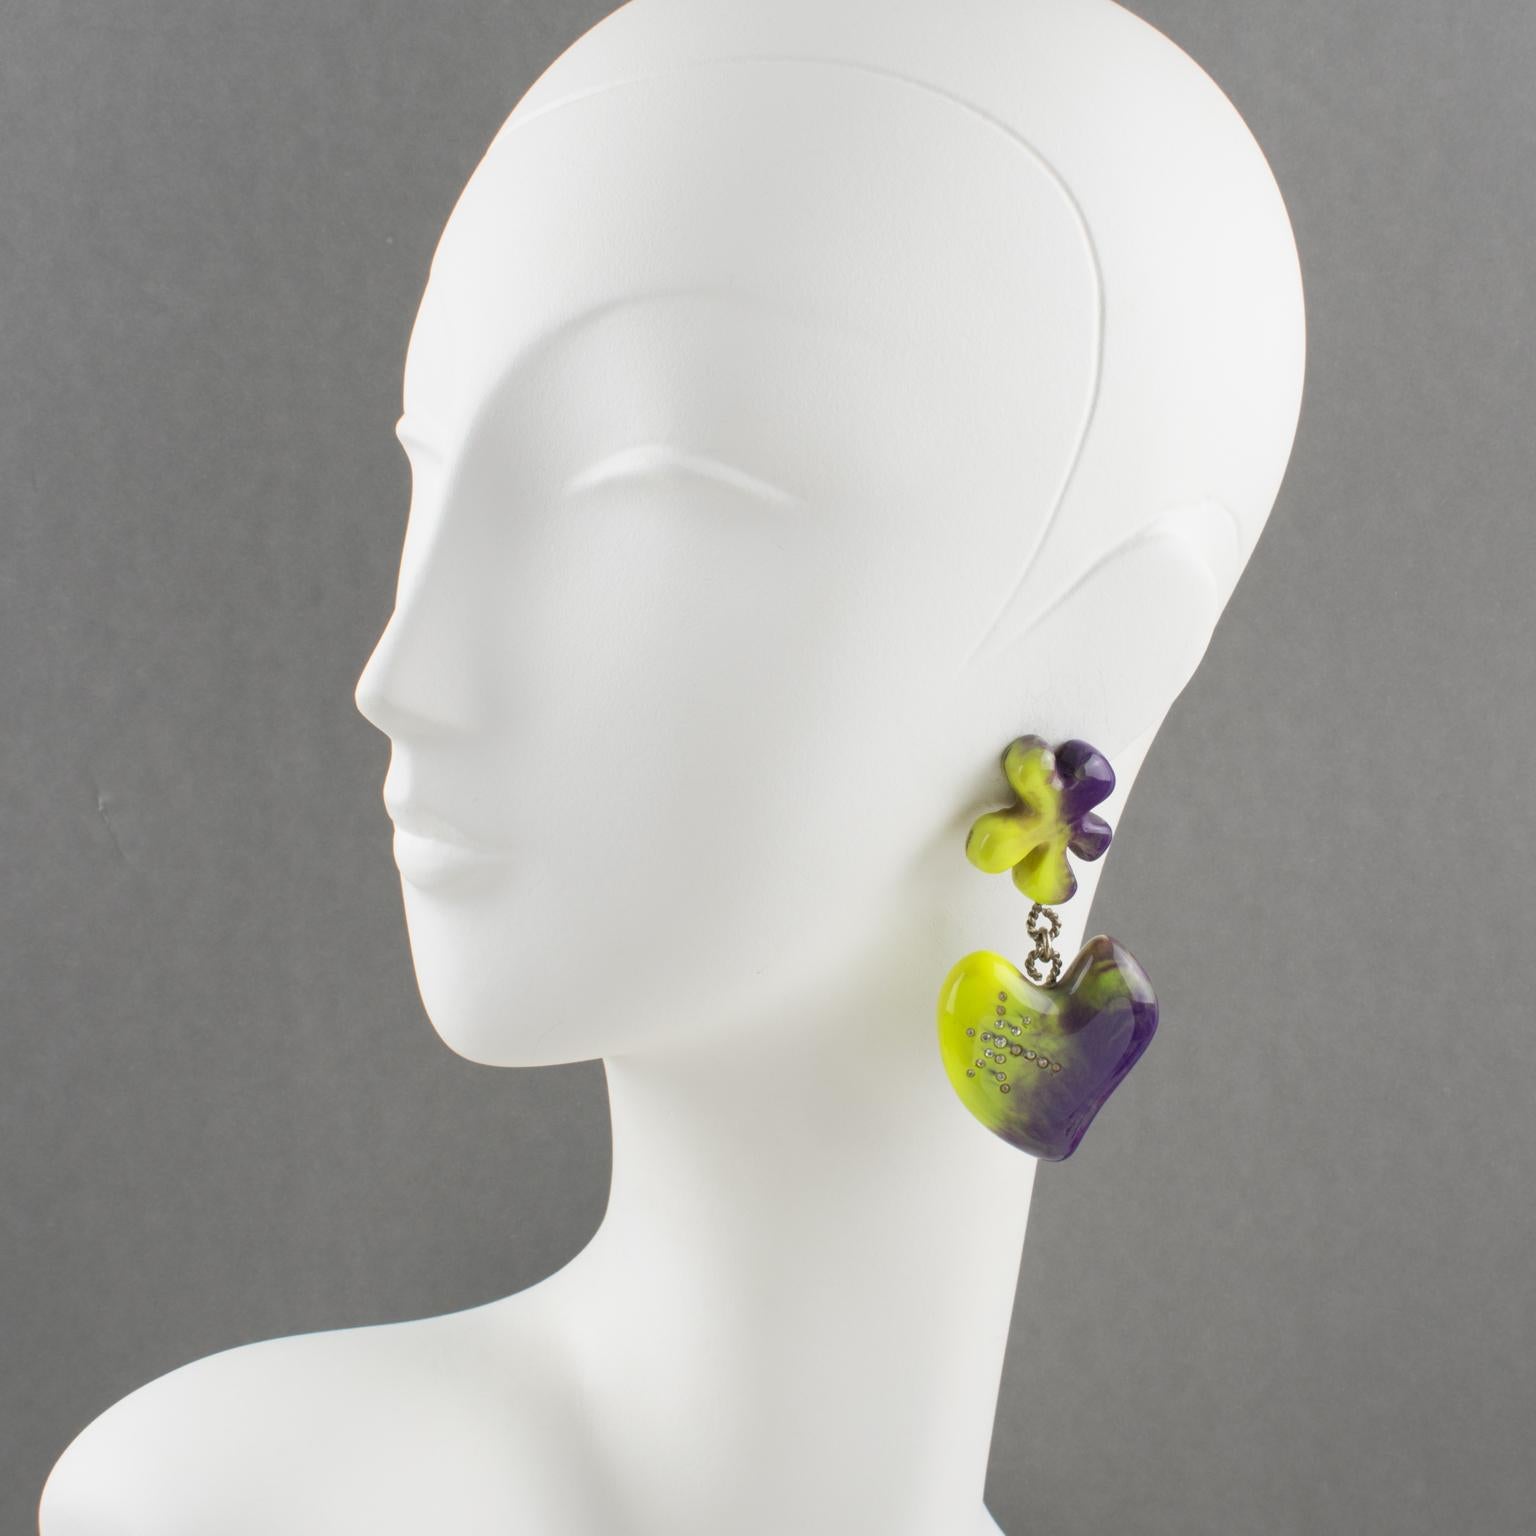 Stunning Christian Lacroix Paris signed clip-on earrings. Oversized bright colors resin dangling shape, featuring abstract flowers and heart ornate with clear crystal rhinestones. Fabulous amethyst purple with pistachio green color, all marbled and